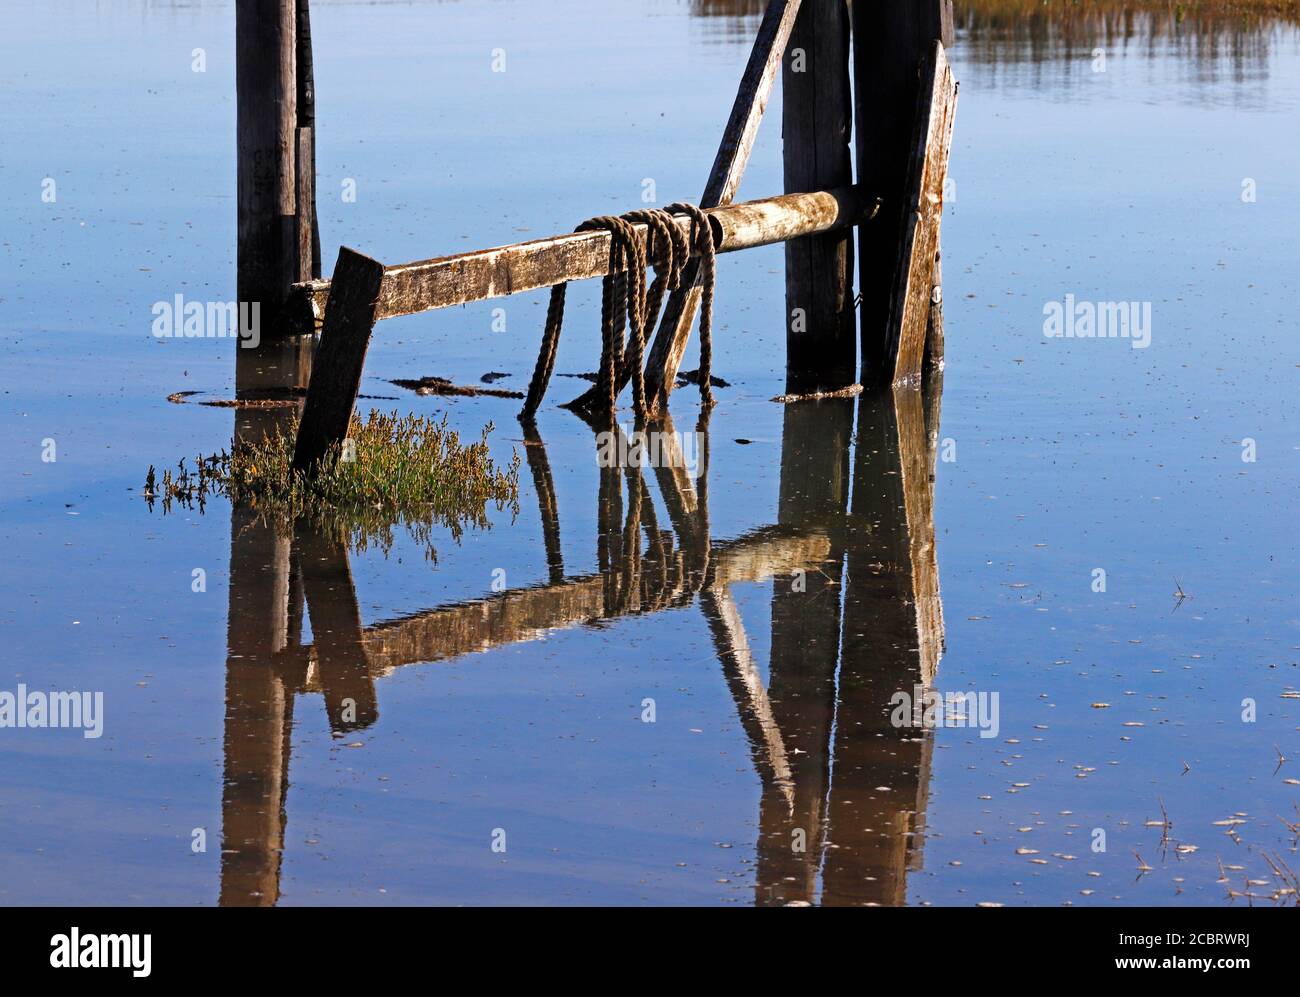 A symmetrical composition of wooden staging and ropes reflecting in overtopping flood tide at the harbour at Thornham, Norfolk, England, UK. Stock Photo